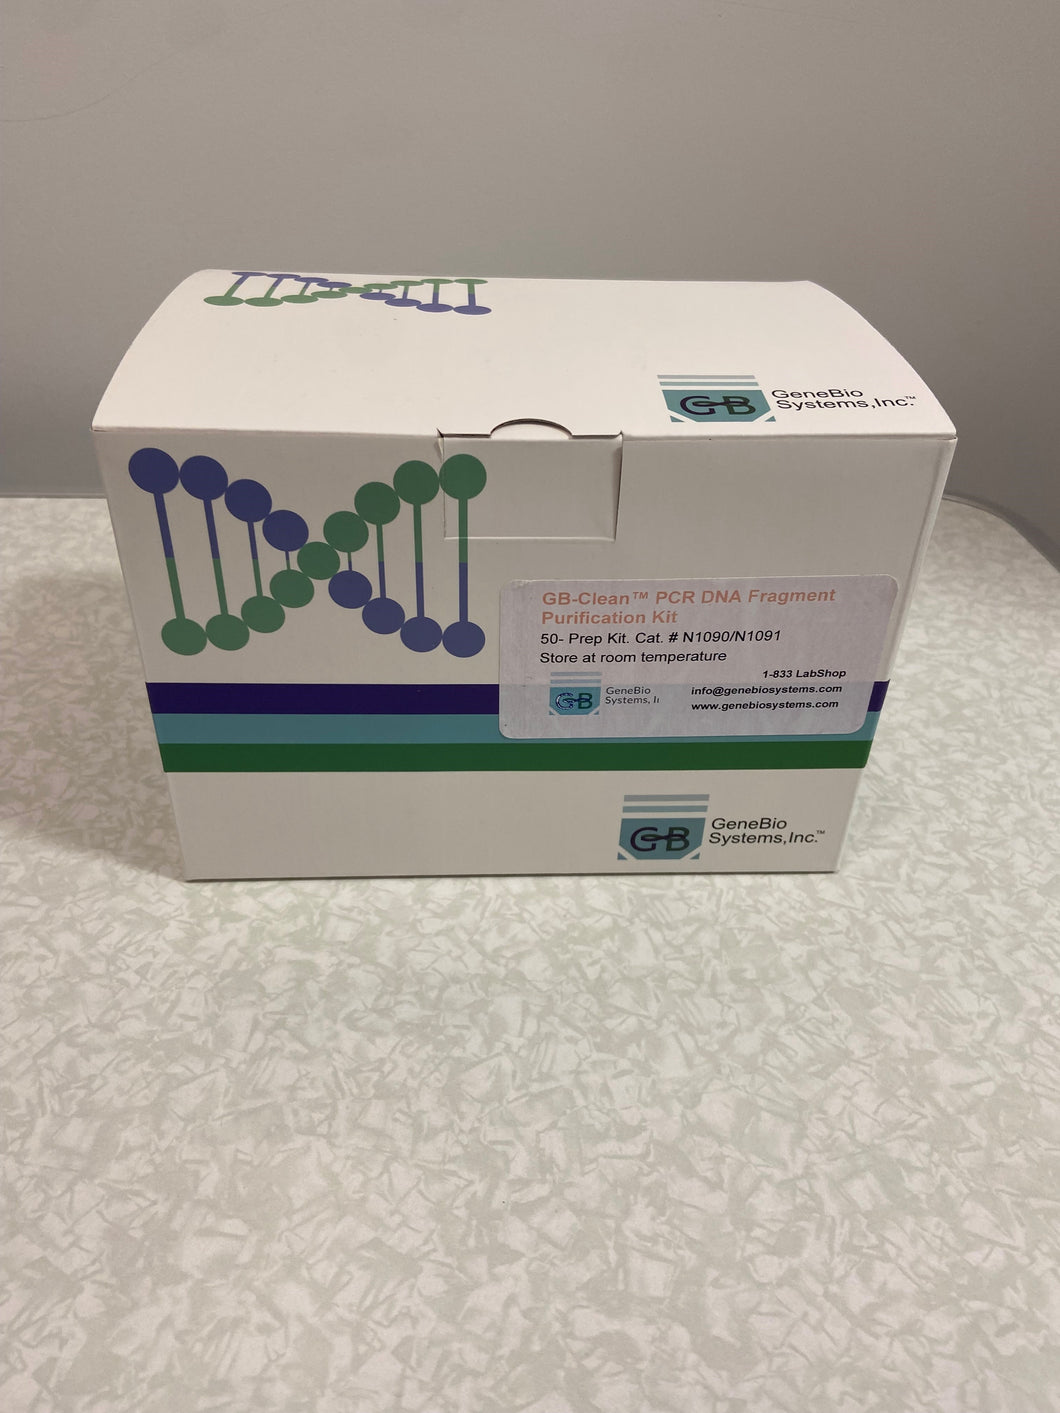 GB-Clean™ PCR-DNA Fragment Purification Kit